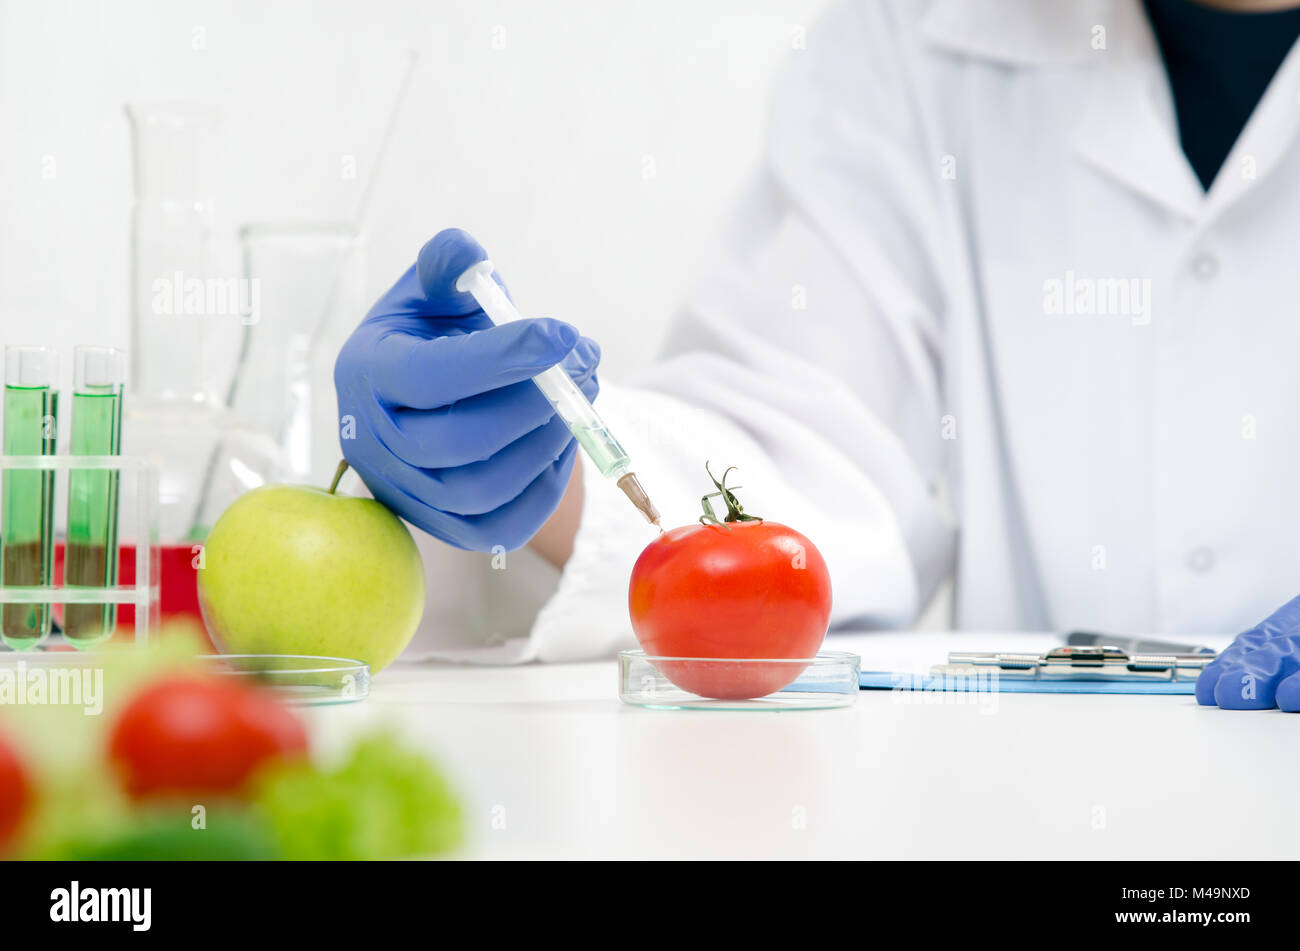 Scientist is working on genetically modified food. Lab GMO research, technician uses the syringe. Stock Photo